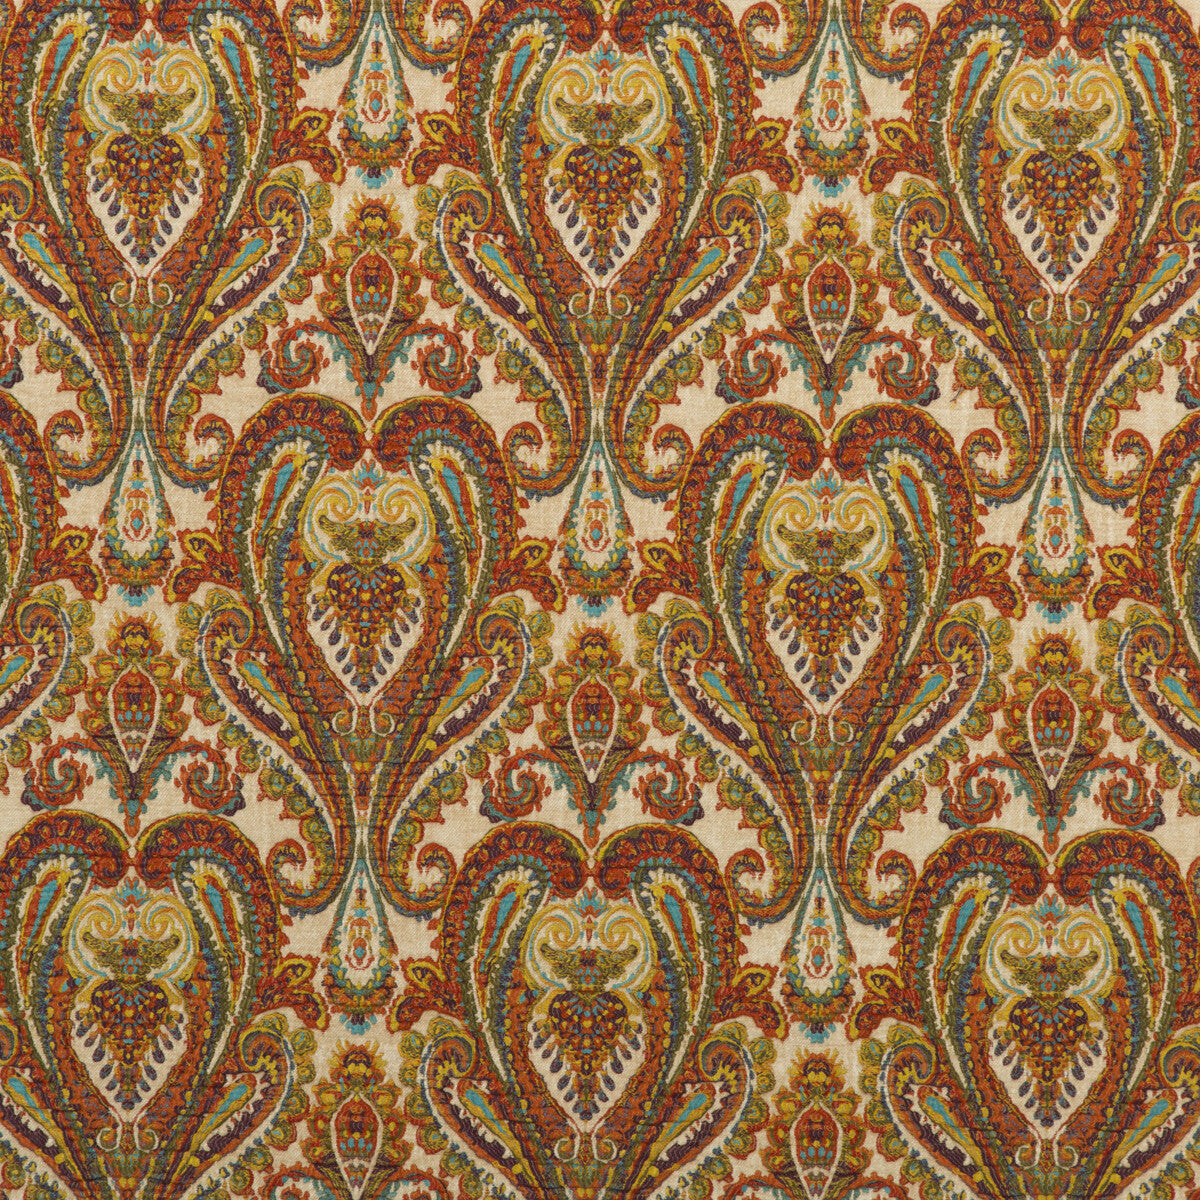 Bohemian Paisley fabric in multi color - pattern FD728.Y101.0 - by Mulberry in the Bohemian Romance collection